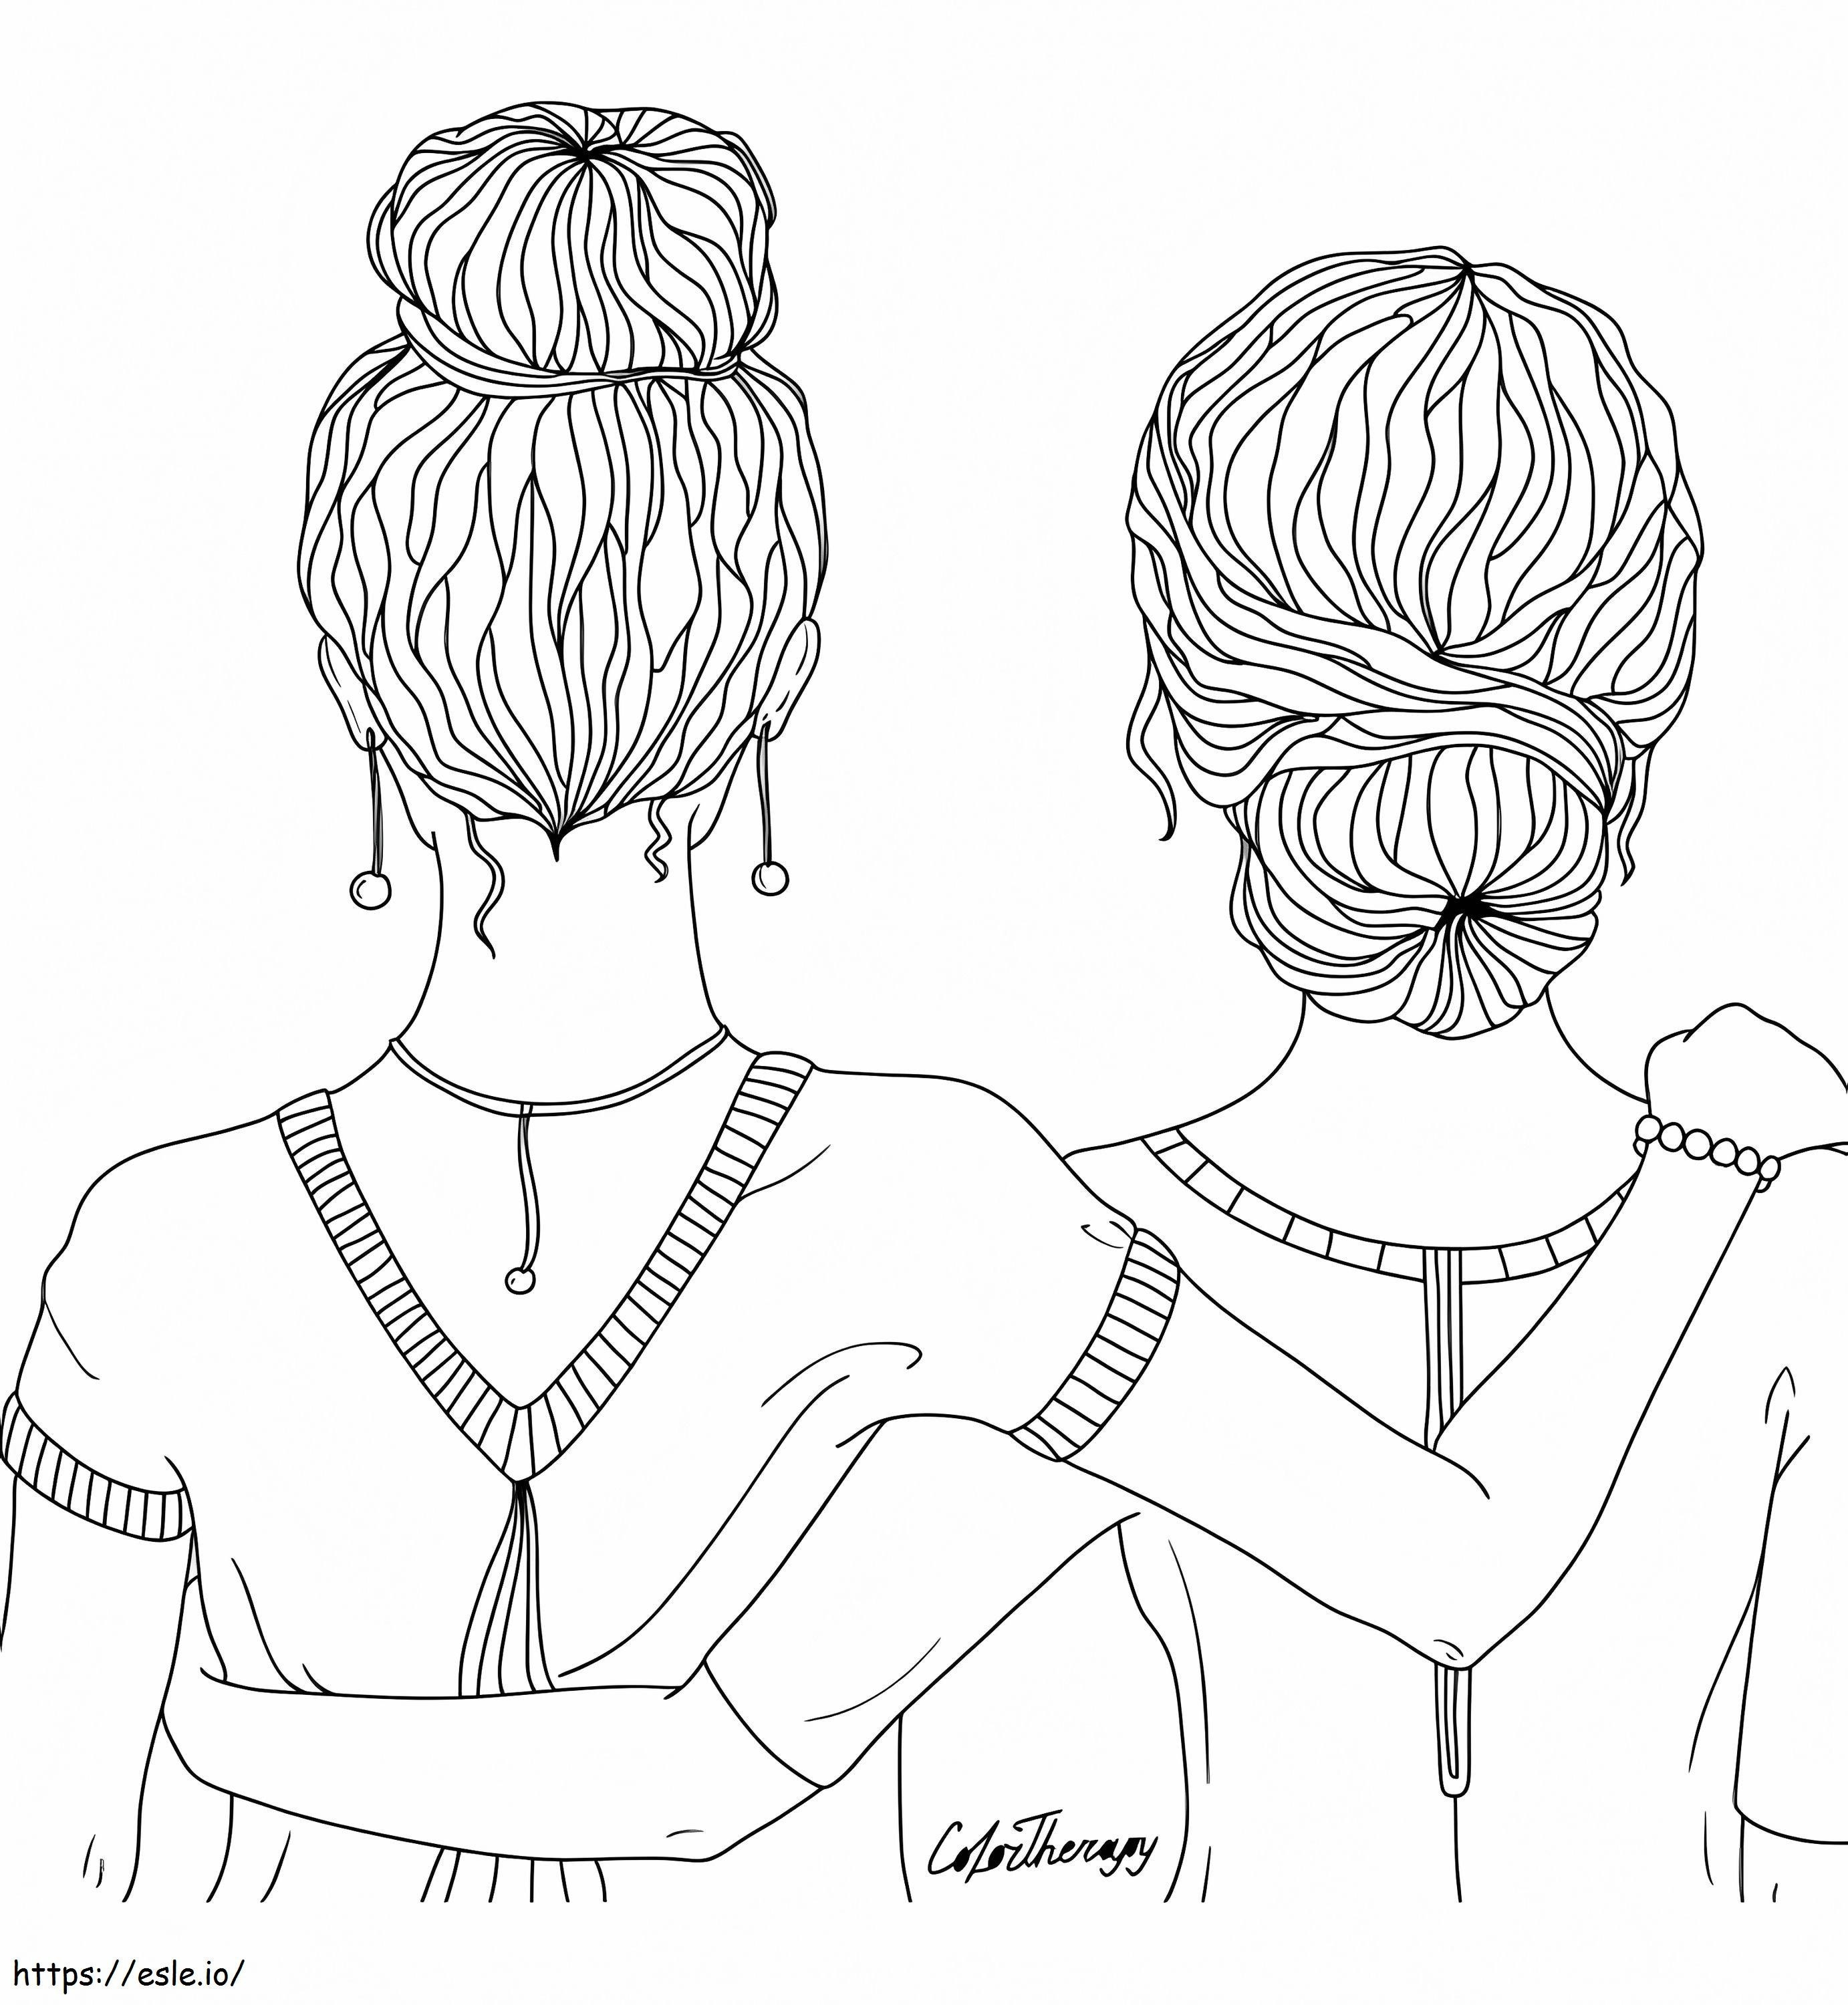 Best Friend VSCO Girl coloring page